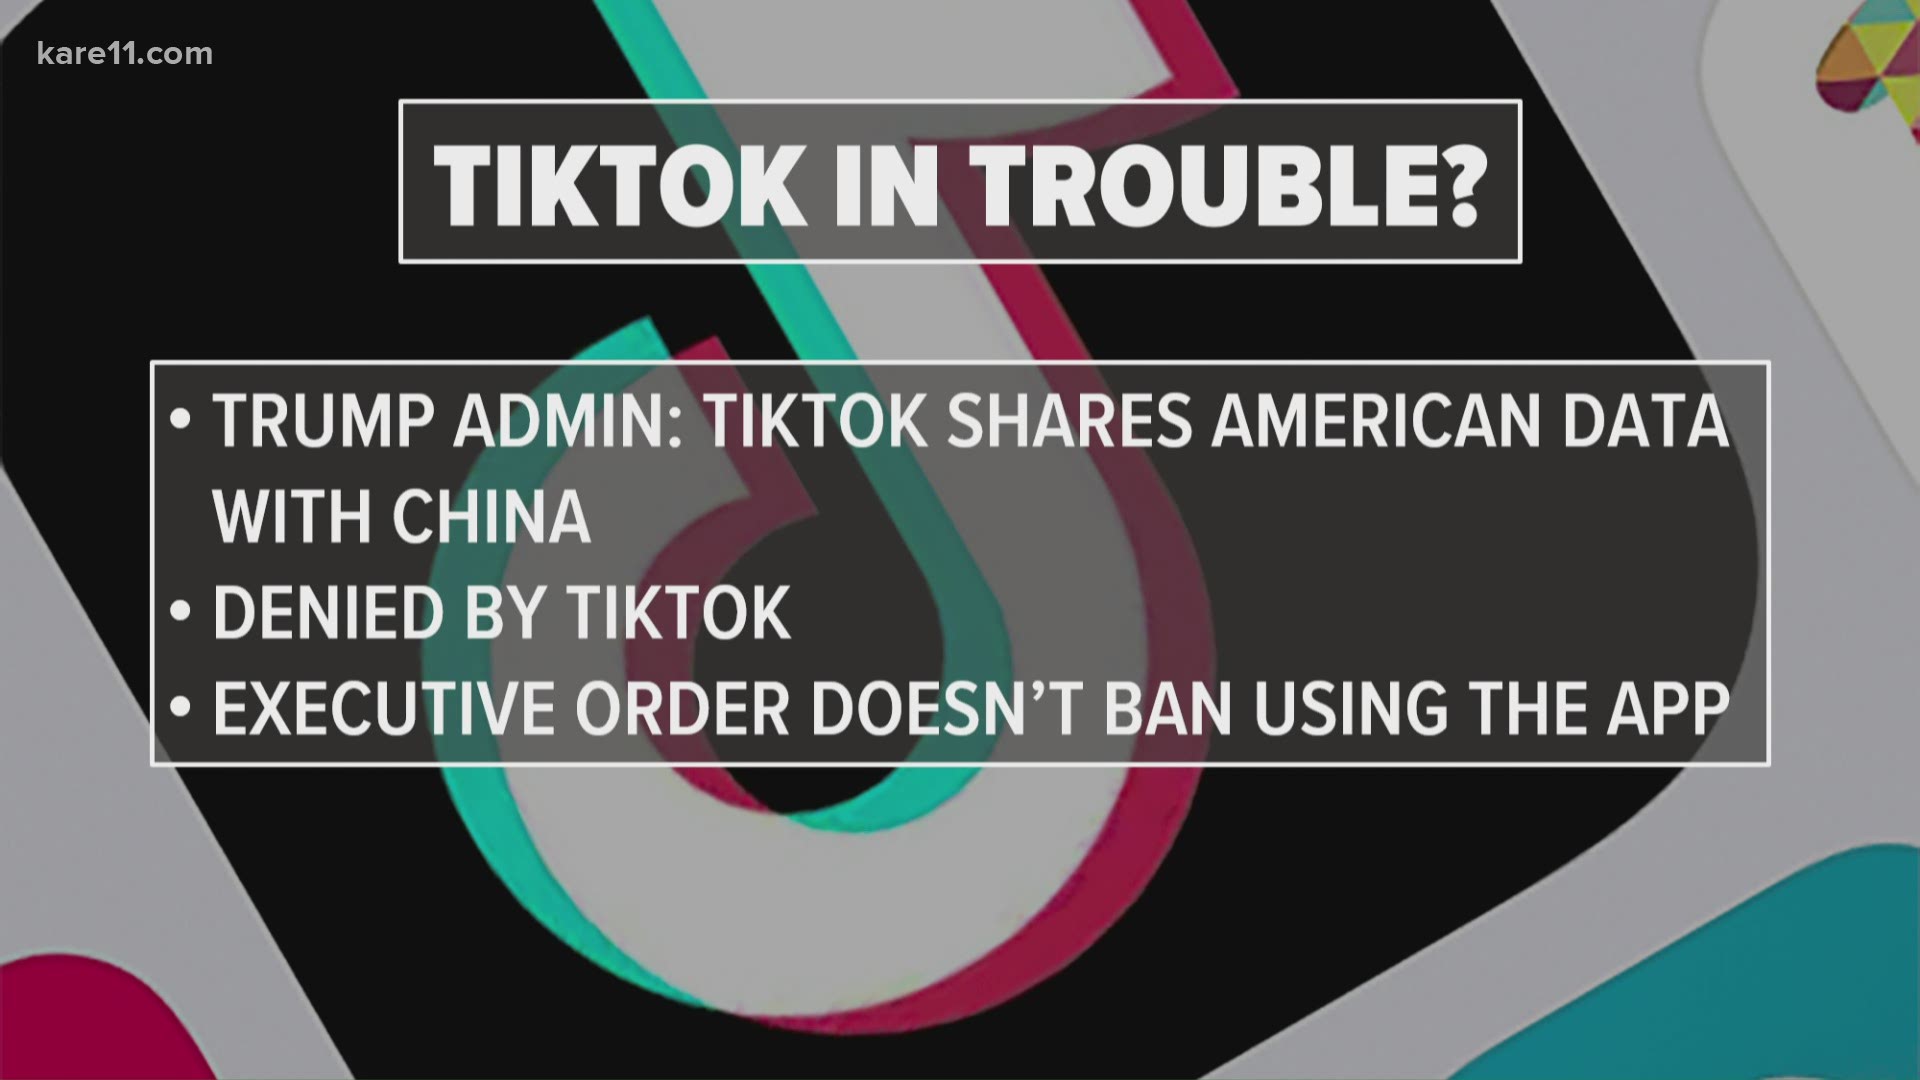 President Trump issued executive orders that take effect in 45 days against the Chinese owners of TikTok and WeChat.